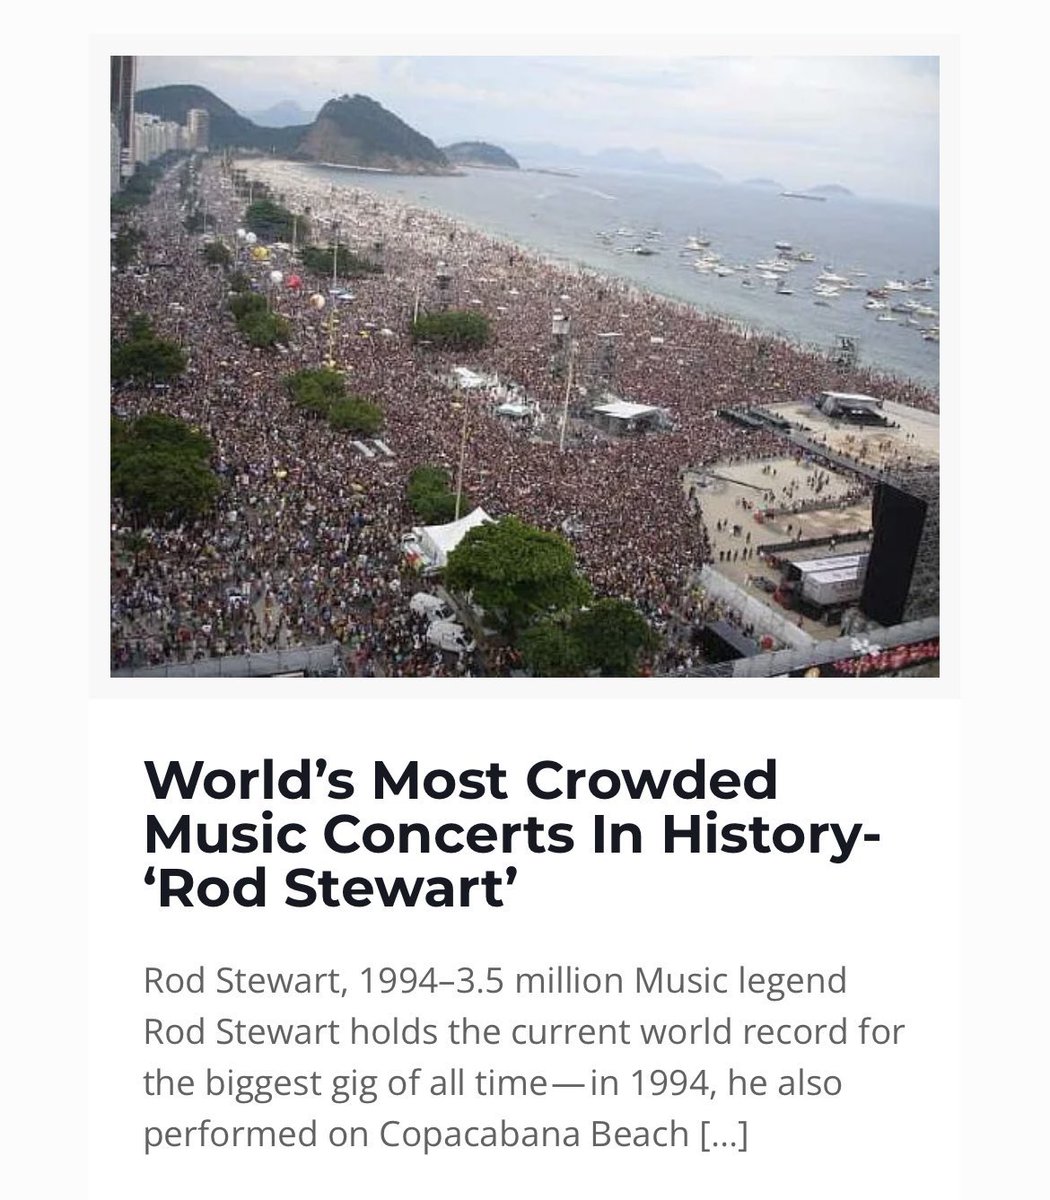 This is a Rod Stewart concert from Brazil 30 years ago… lol